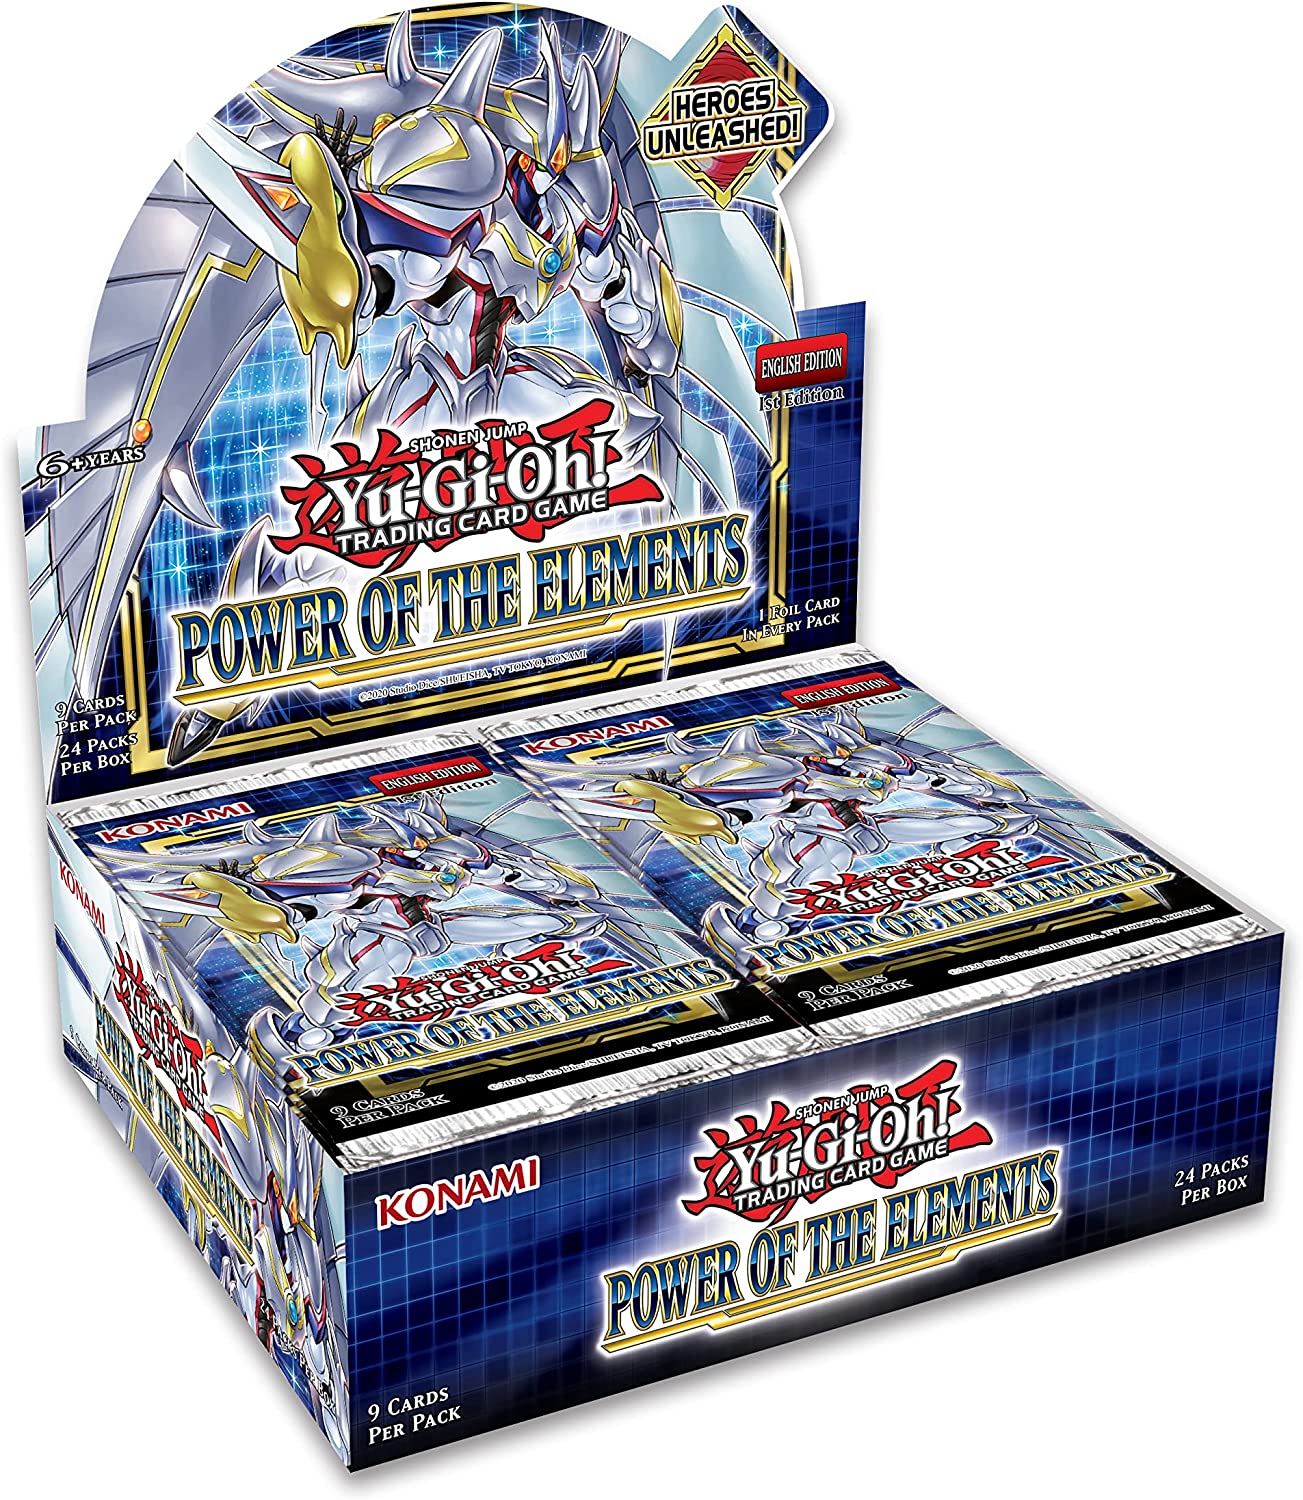 YU-GI-OH! Power Of The Elements (24 Packs)